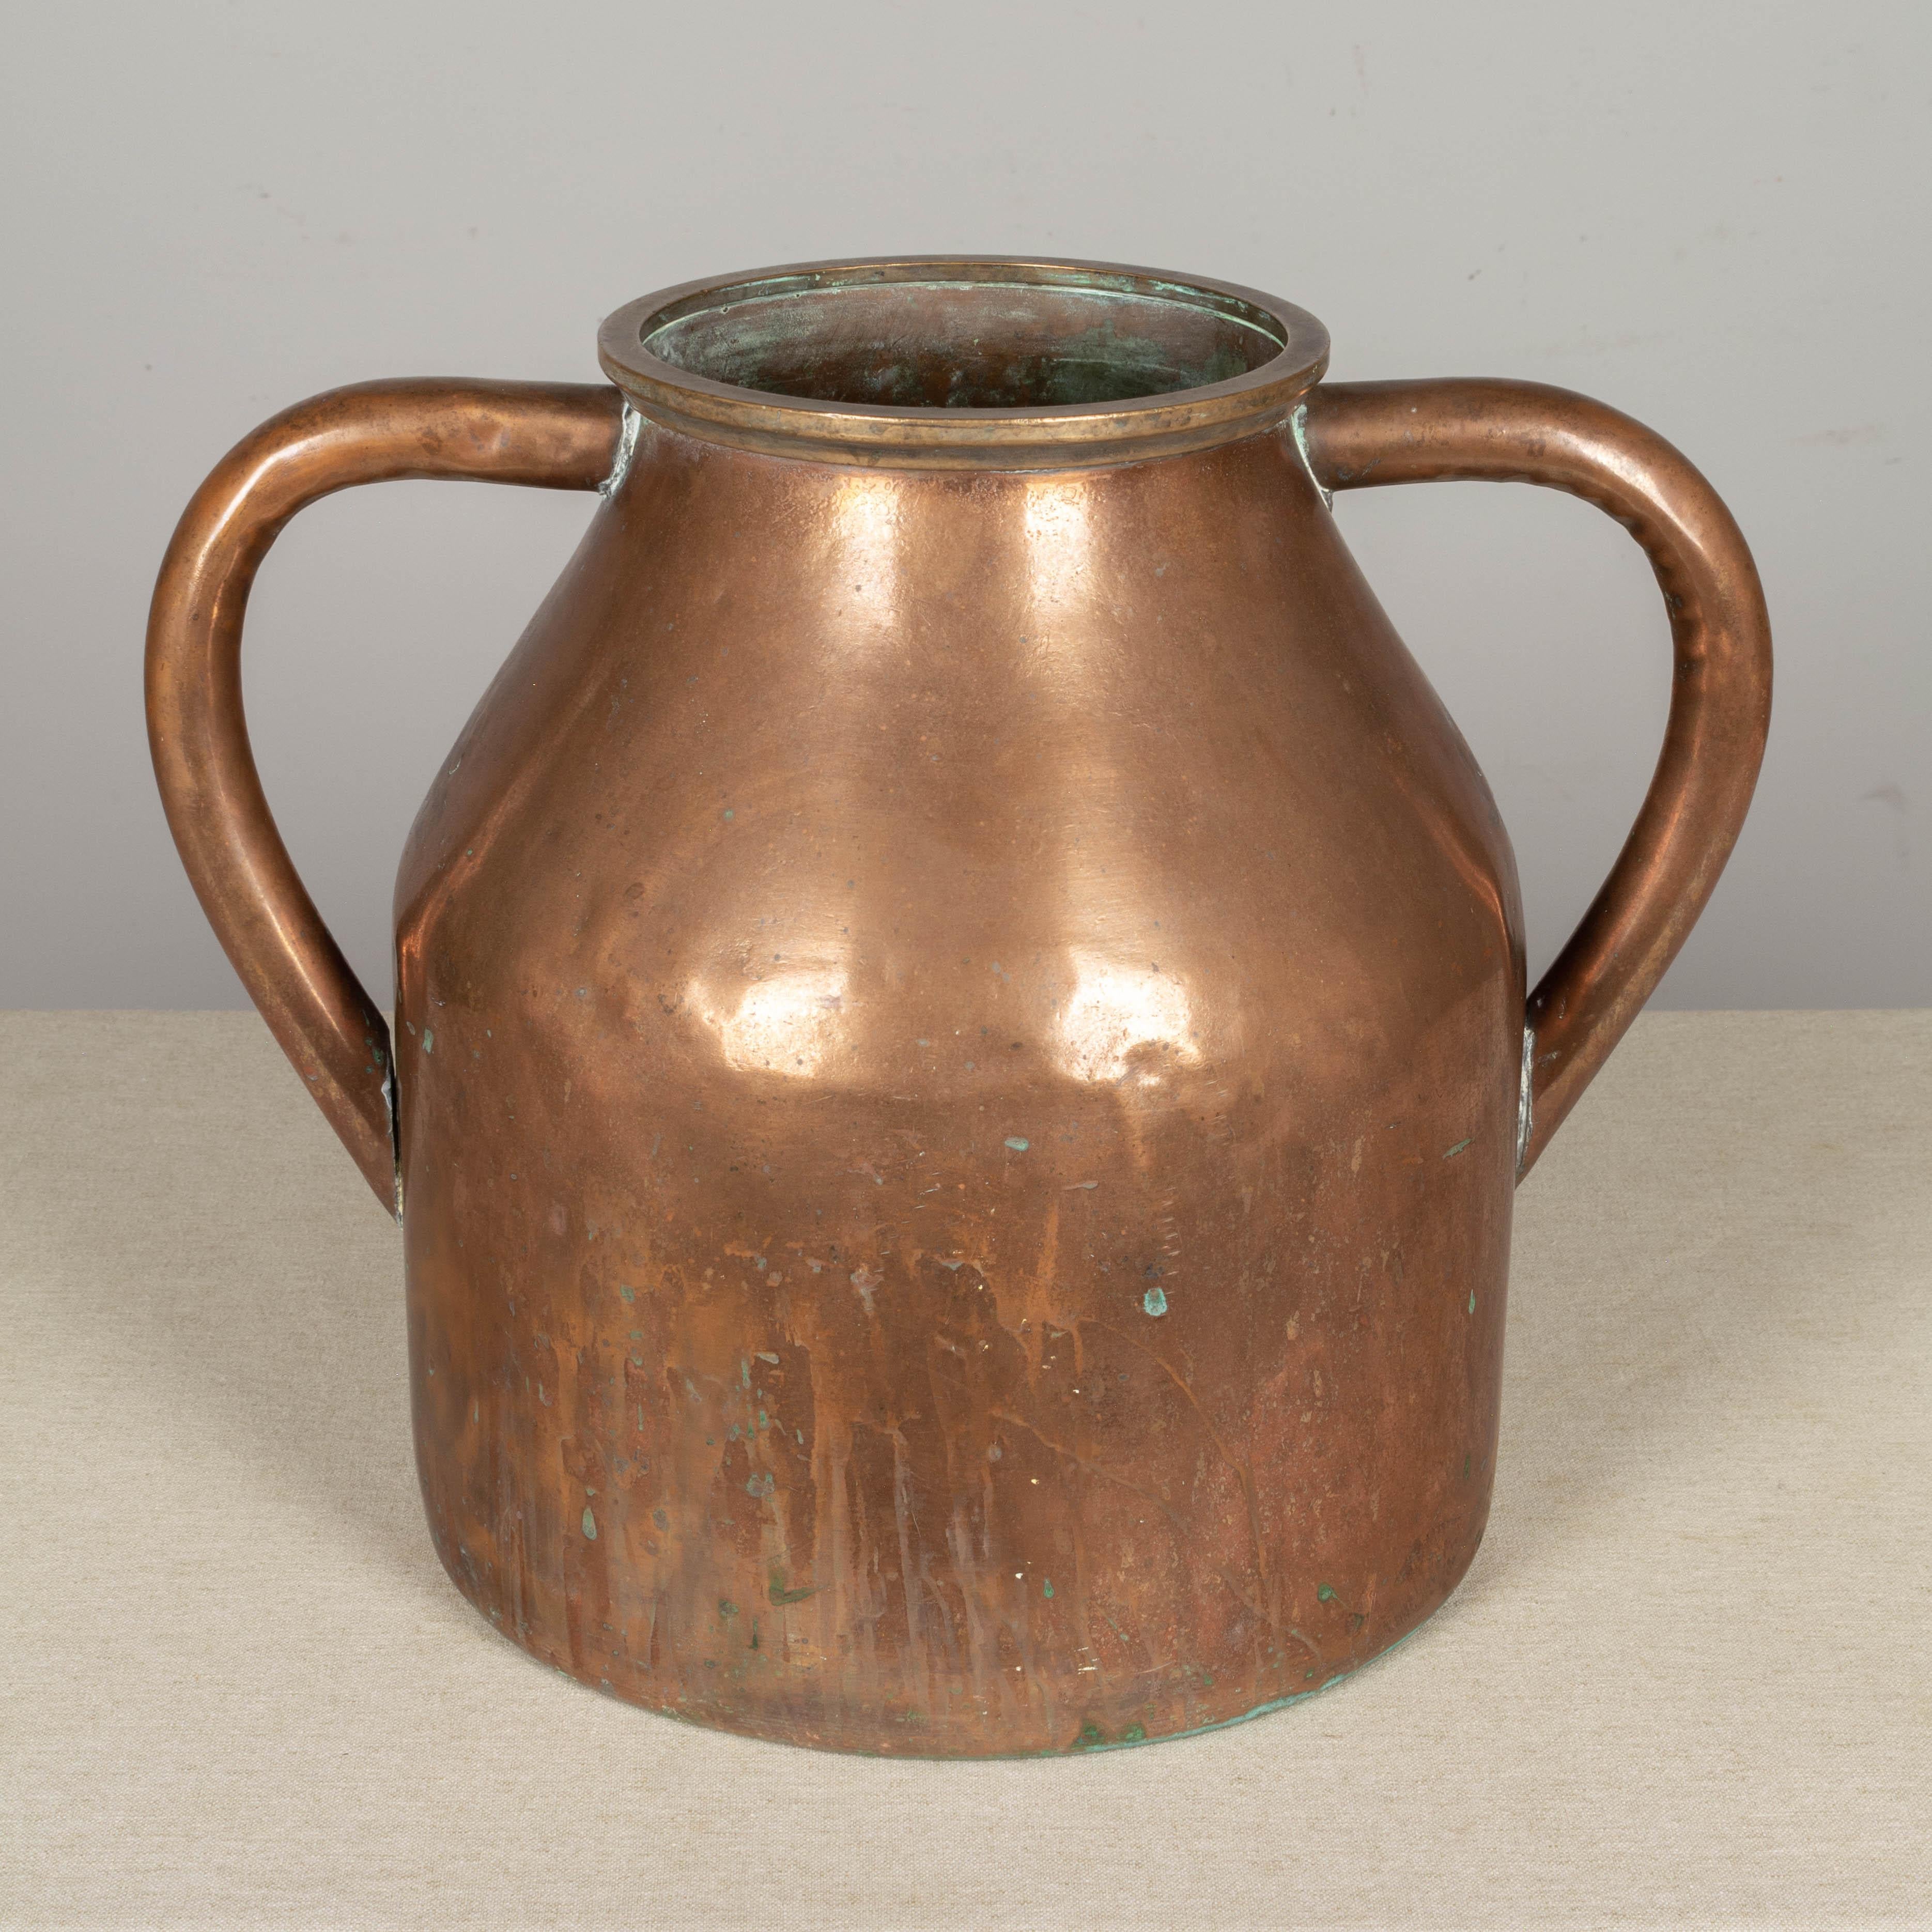 A large 19th century French copper vessel or vase with double handles. Beautiful warm patina with streaks and green oxidation. 
Overall dimensions: 14